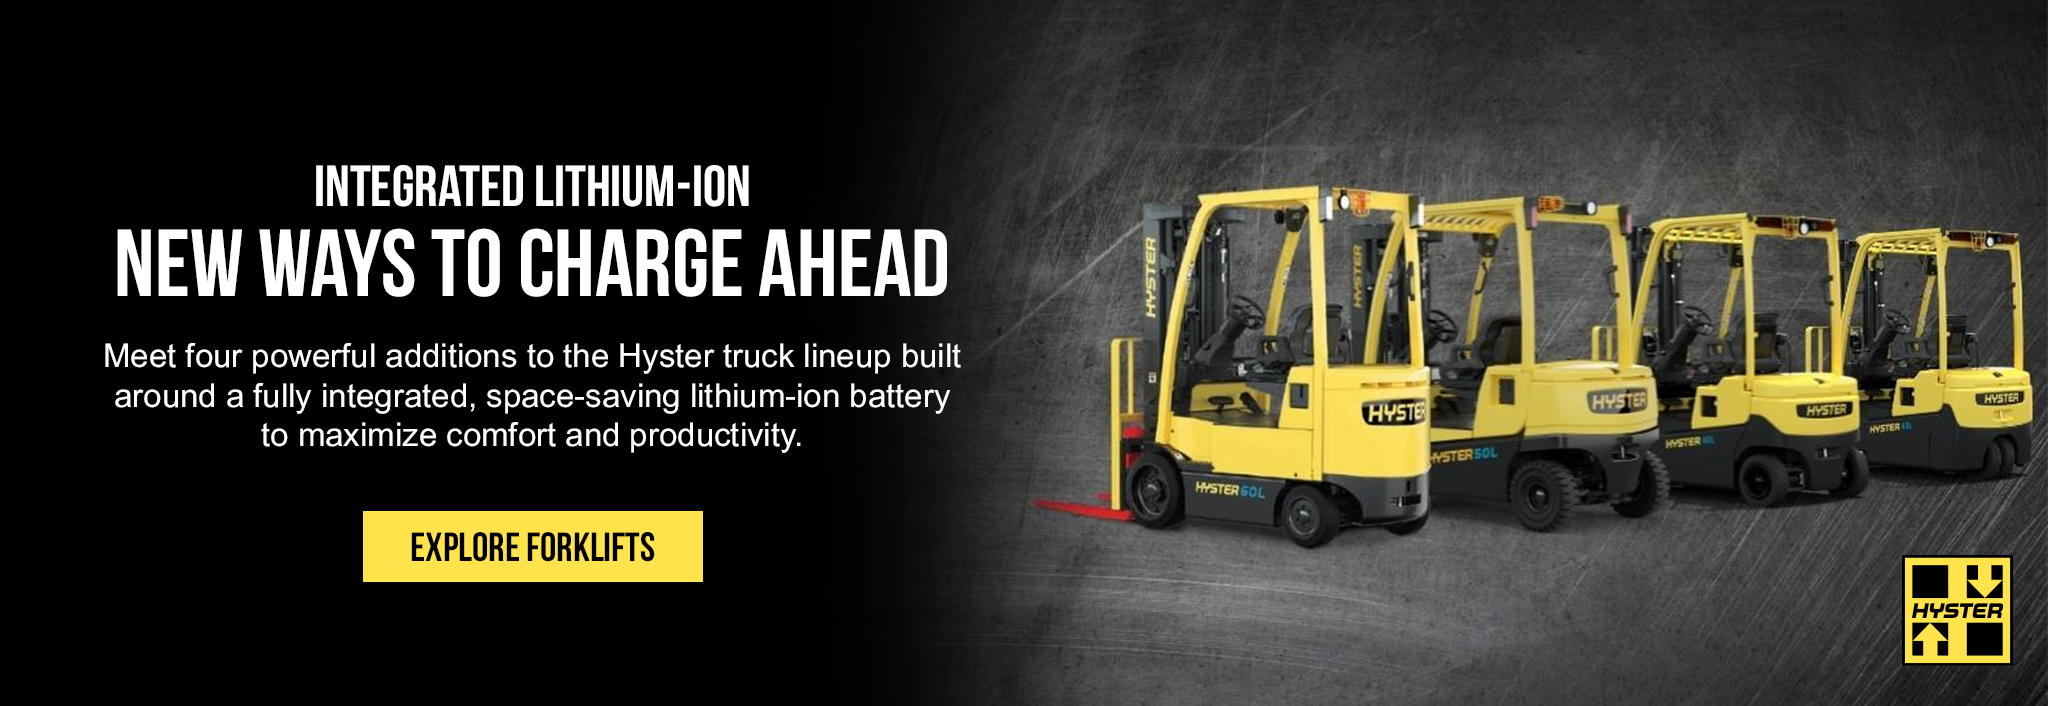 Hyster Integrated Li-ion Lineup Promo Banner